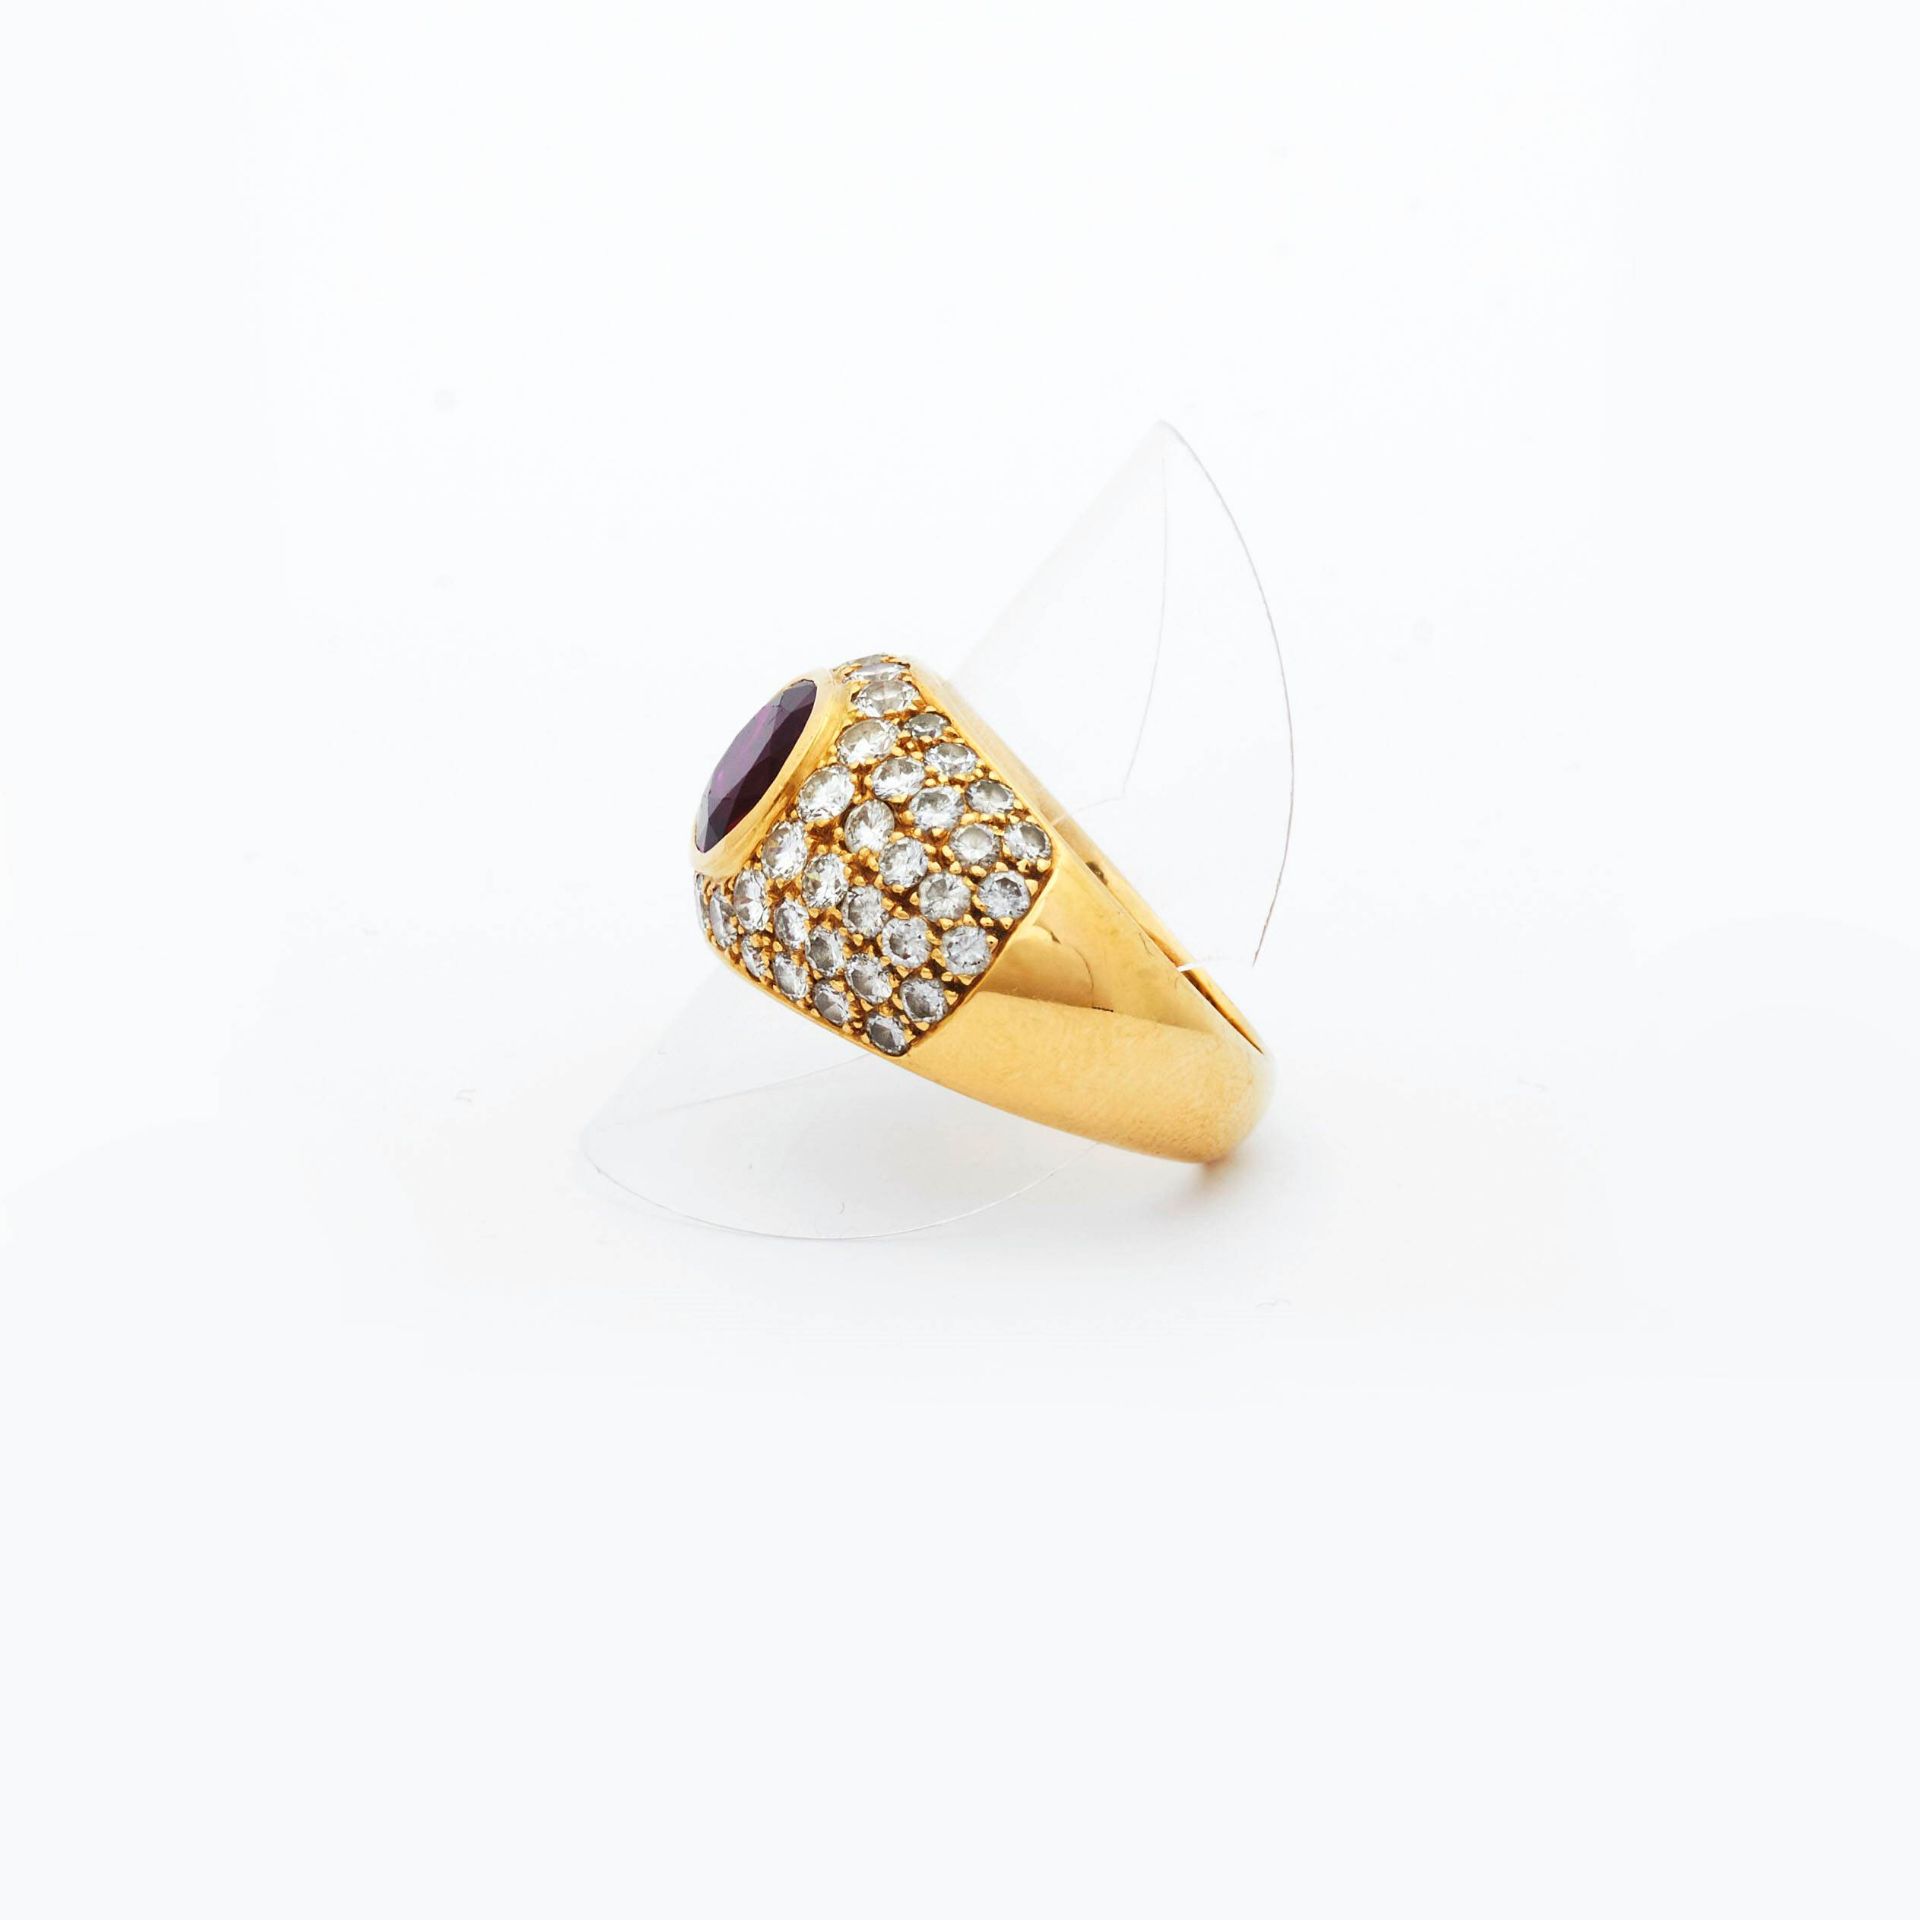 RUBY AND DIAMOND RING. - Image 3 of 4